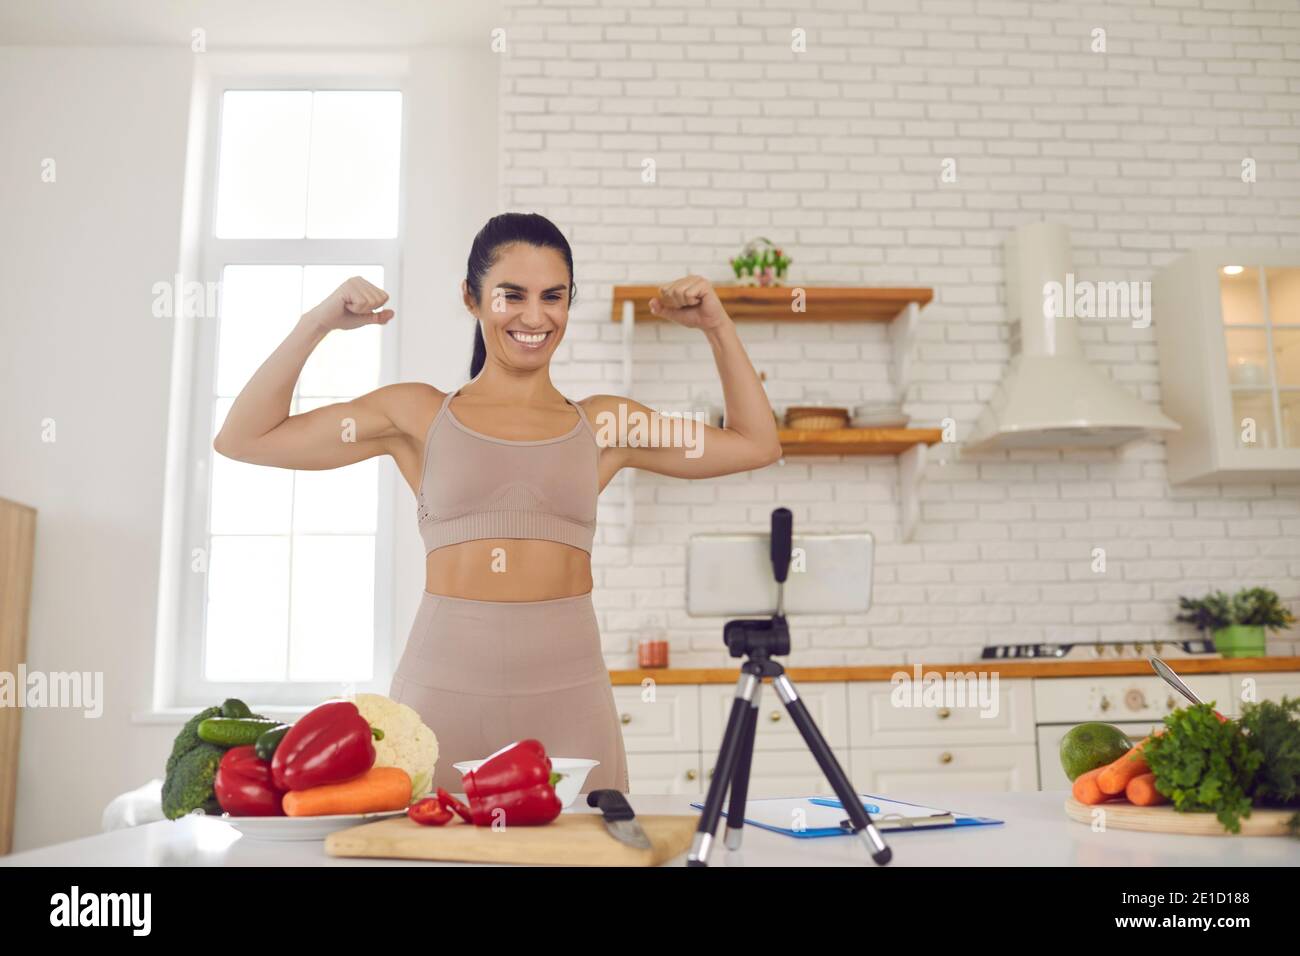 Energetic fitness blogger filming vlog on vegetarian diet and healthy eating habits Stock Photo